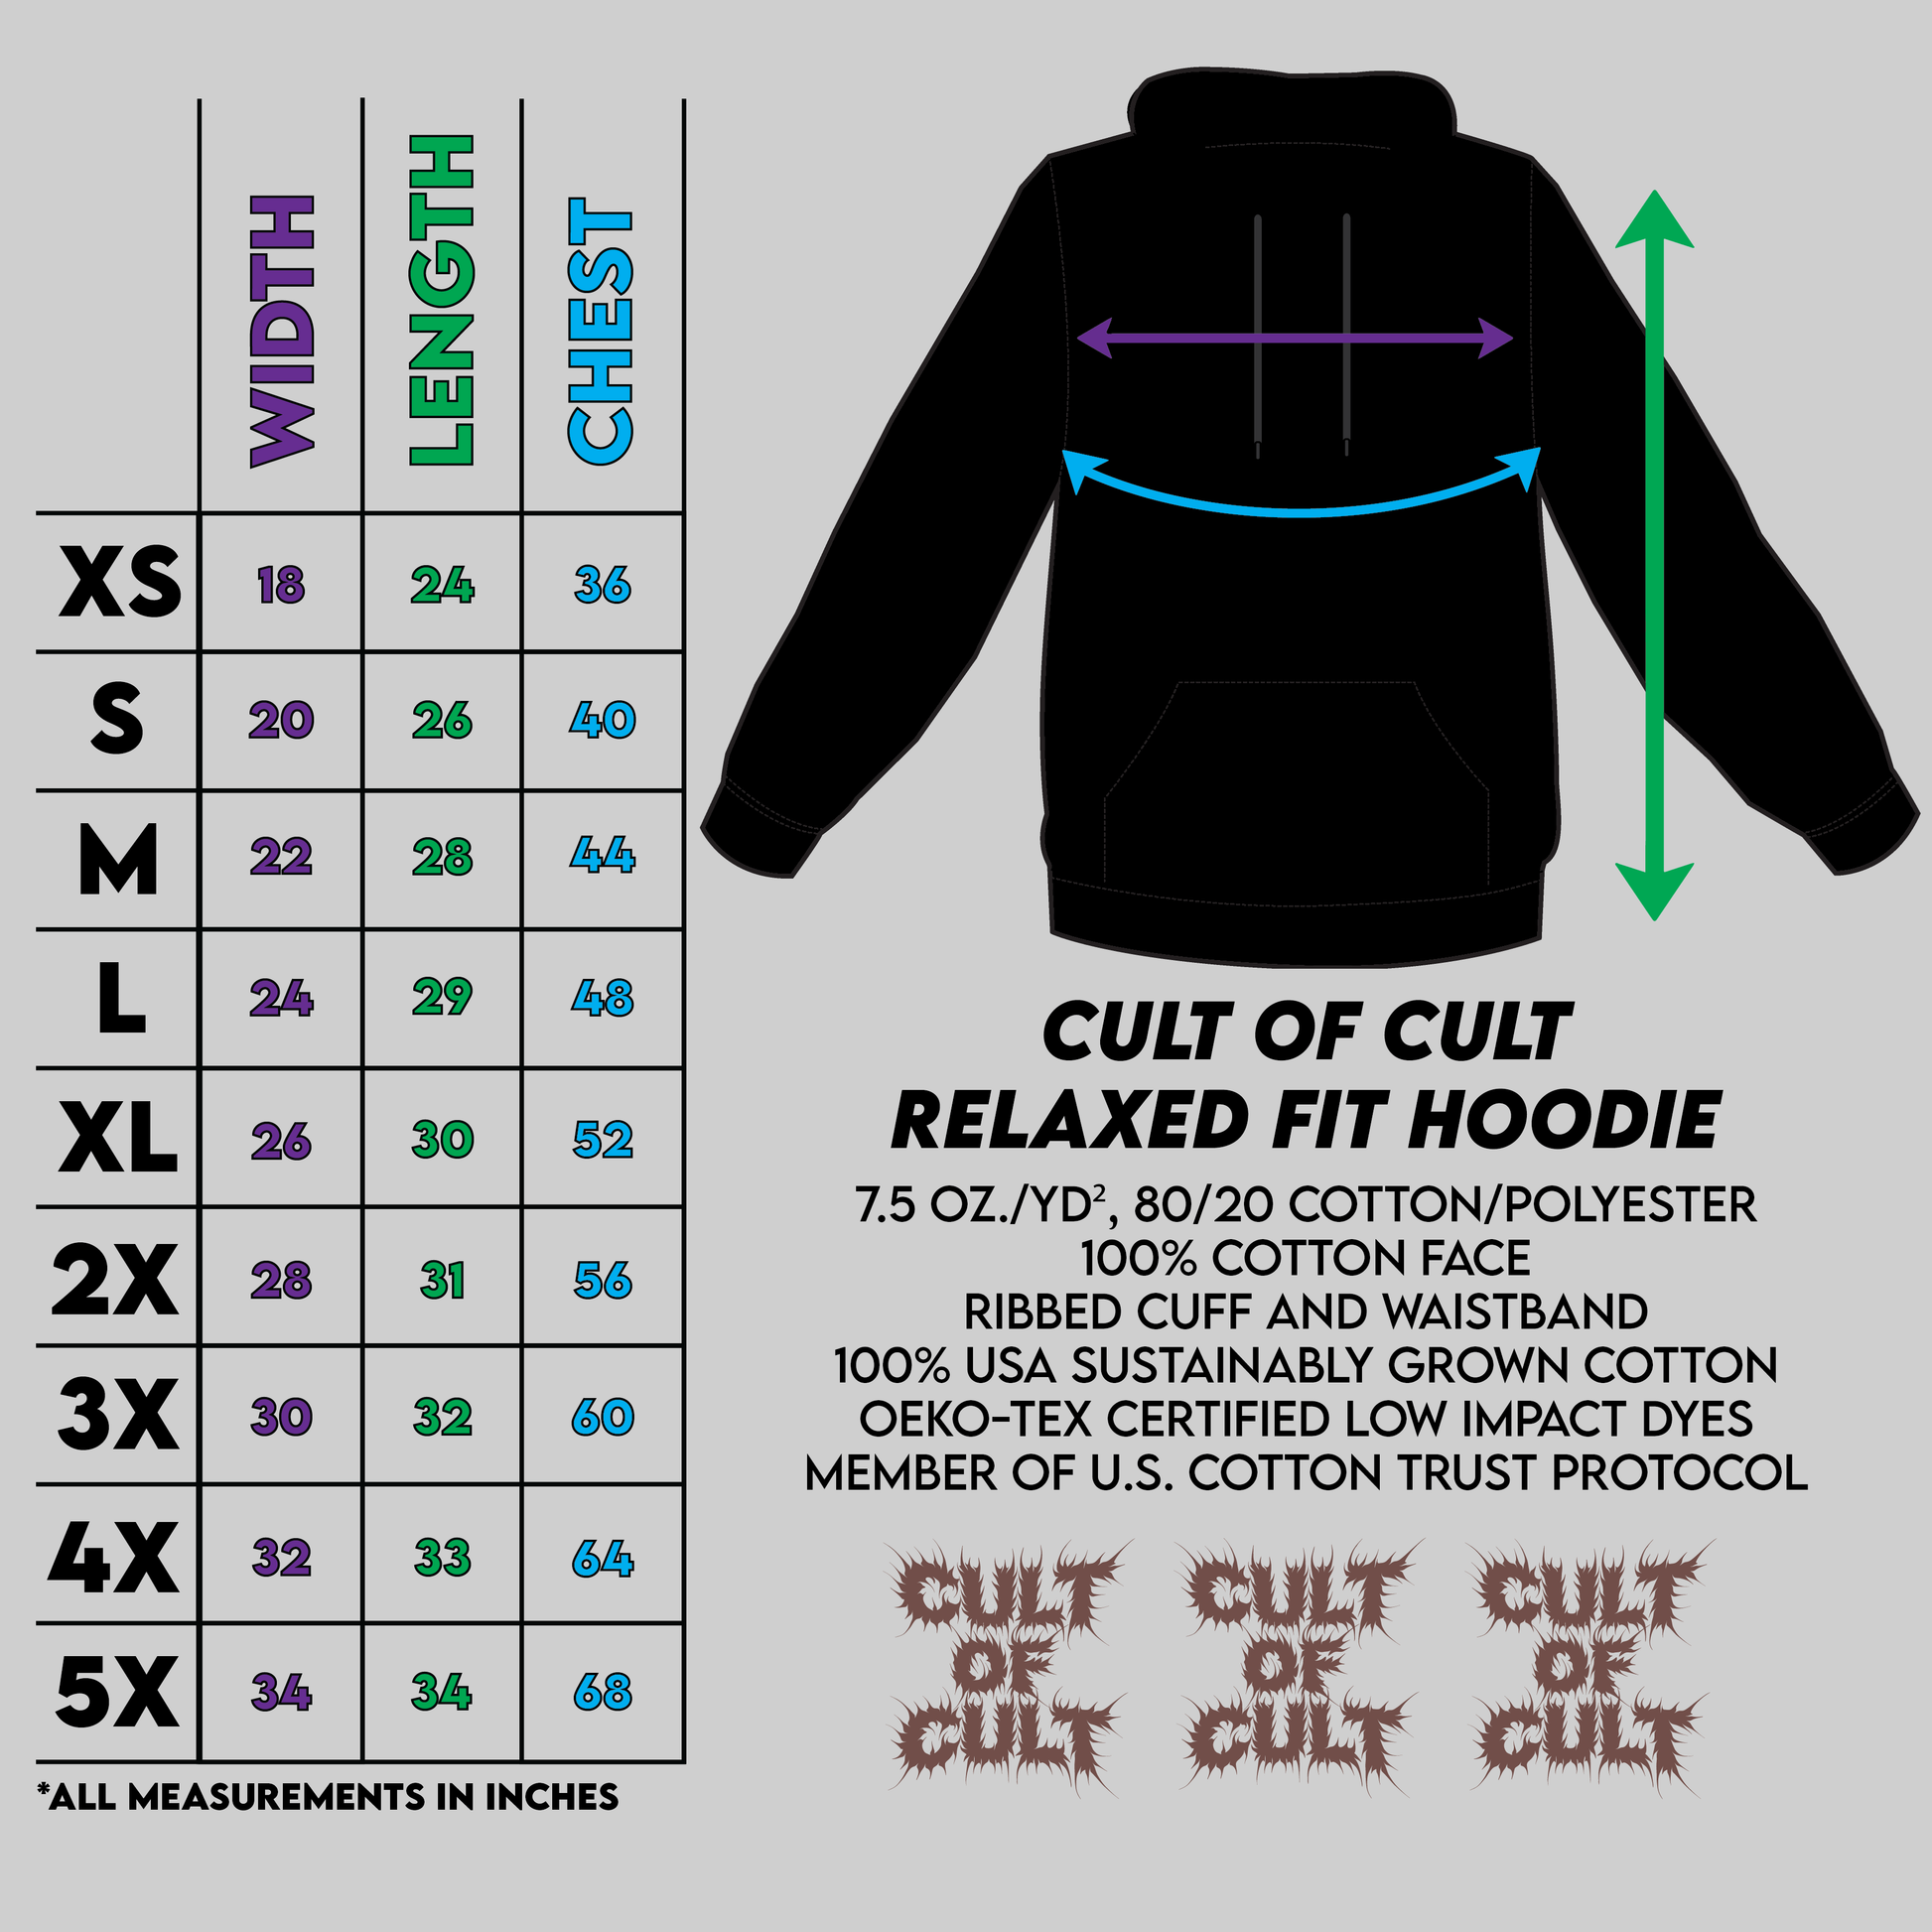 A sizing chart for Cult of Cult hoodies